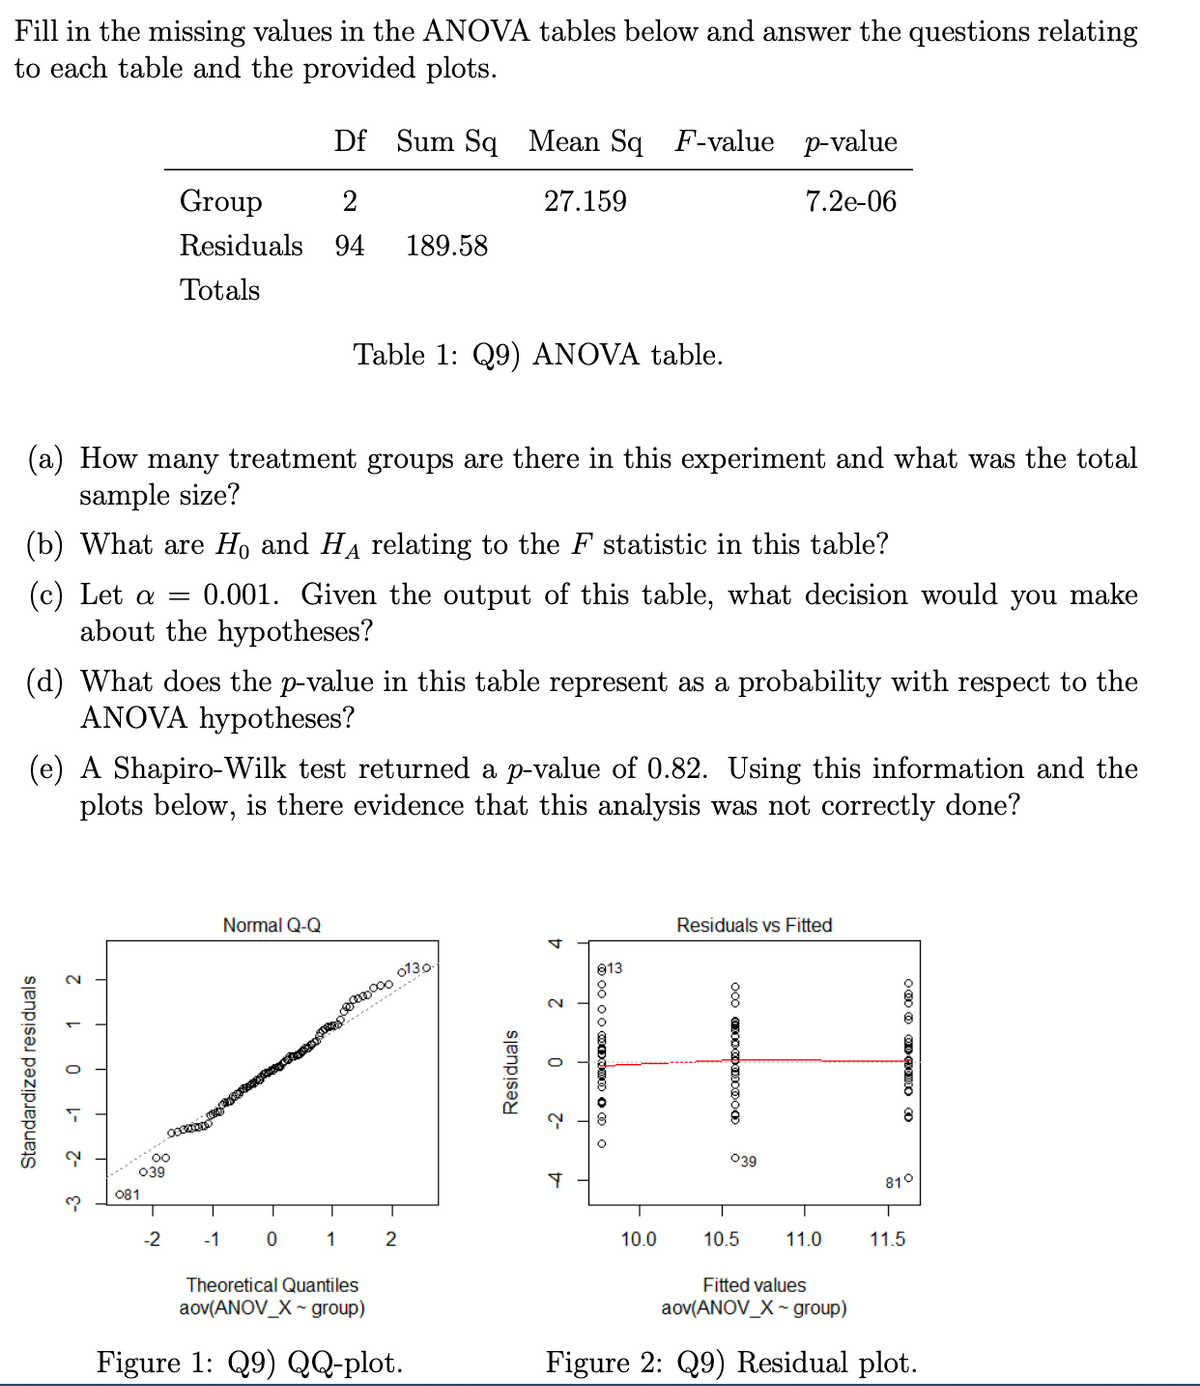 Fill in the missing values in the ANOVA tables below and answer the questions relating
to each table and the provided plots.
Df Sum Sq Mean Sq F-value p-value
Group
2
27.159
7.2e-06
Residuals 94
189.58
Totals
Table 1: Q9) ANOVA table.
(a) How many treatment groups are there in this experiment and what was the total
sample size?
(b) What are Ho and HA relating to the F statistic in this table?
(c) Let a =
0.001. Given the output of this table, what decision would you make
about the hypotheses?
(d) What does the p-value in this table represent as a probability with respect to the
ANOVA hypotheses?
(e) A Shapiro-Wilk test returned a p-value of 0.82. Using this information and the
plots below, is there evidence that this analysis was not correctly done?
Normal Q-Q
Residuals vs Fitted
0130
813
....
00
039
039
081
T
81°
T
-2
-1
1
10.0
10.5
11.0
11.5
Theoretical Quantiles
Fitted values
aov(ANOV_X ~ group)
aov(ANOV_X ~ group)
Figure 1: Q9) QQ-plot.
Figure 2: Q9) Residual plot.
Standardized residuals
-2
E-
-1
1 2
Residuals
O 00 00 MDOD O O O
